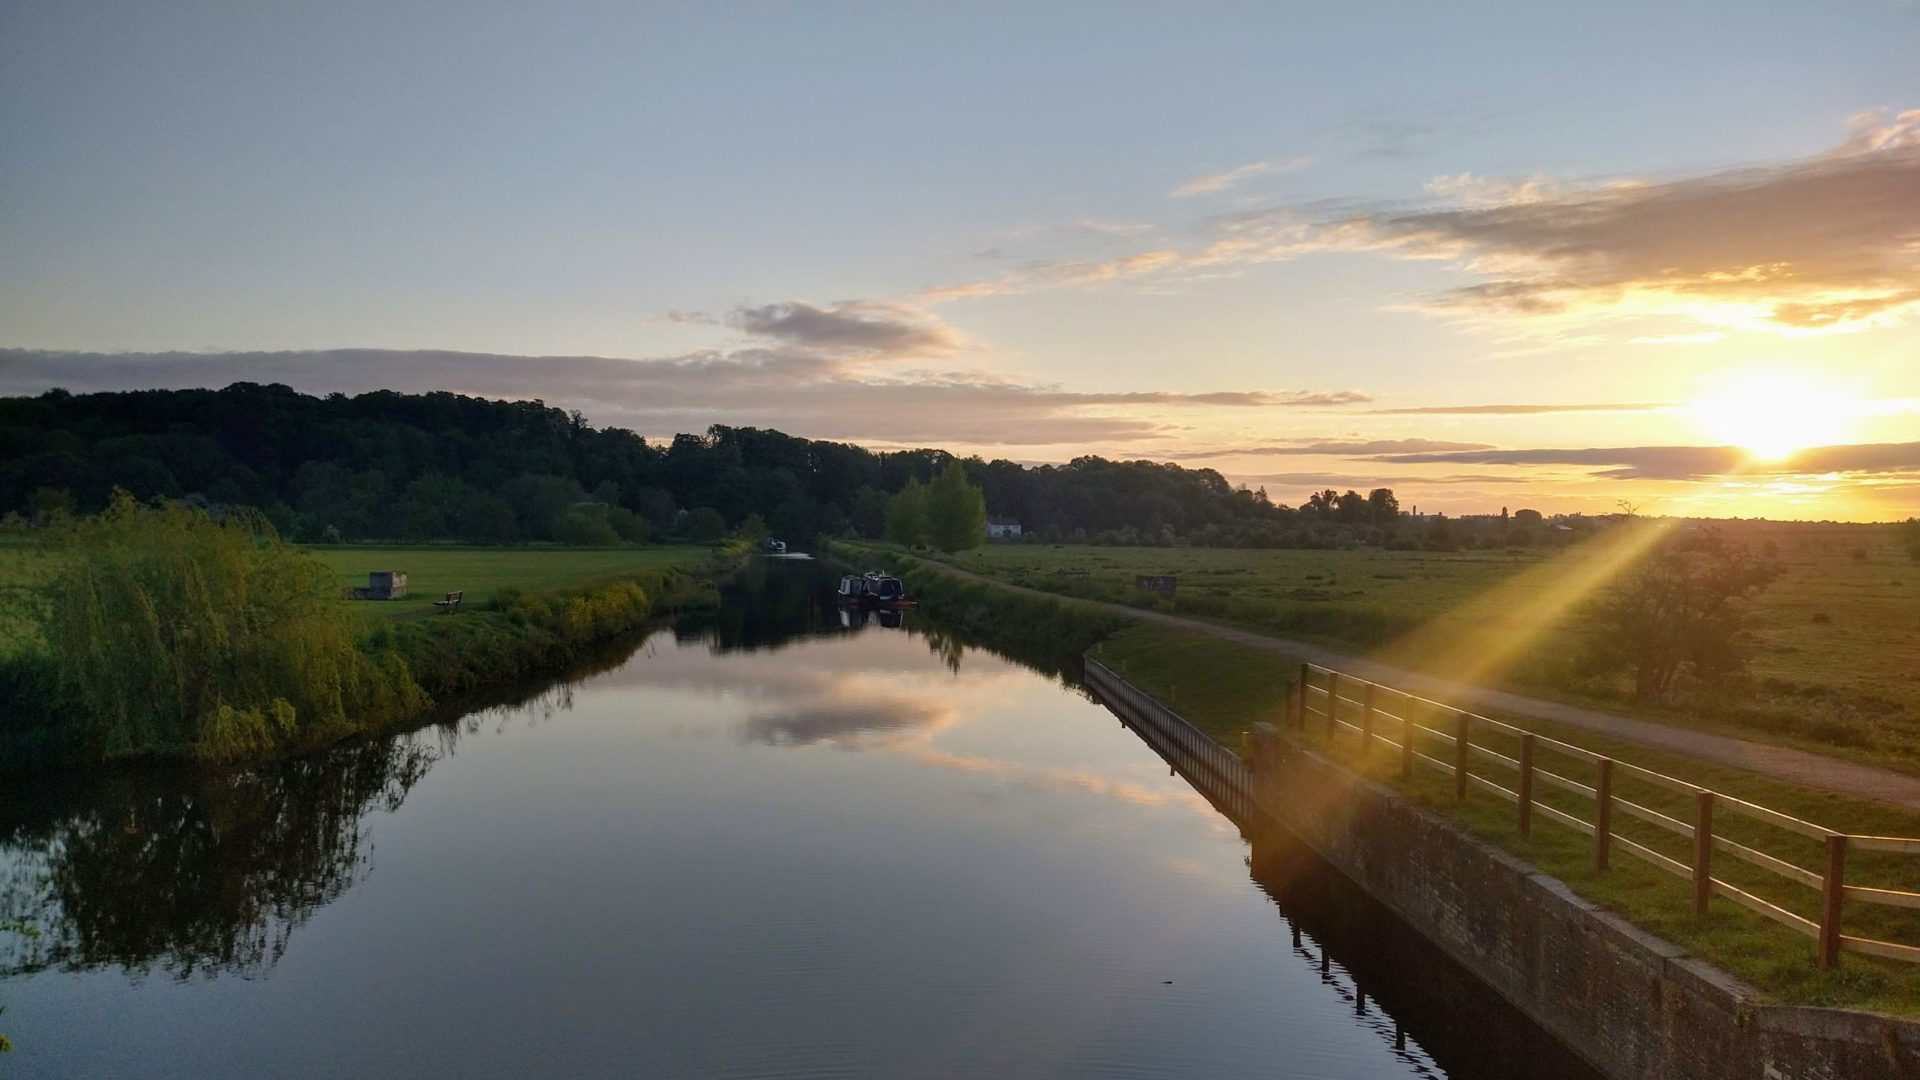 at dawn, the sun rising over green fields and hills, with the river lea in the foreground